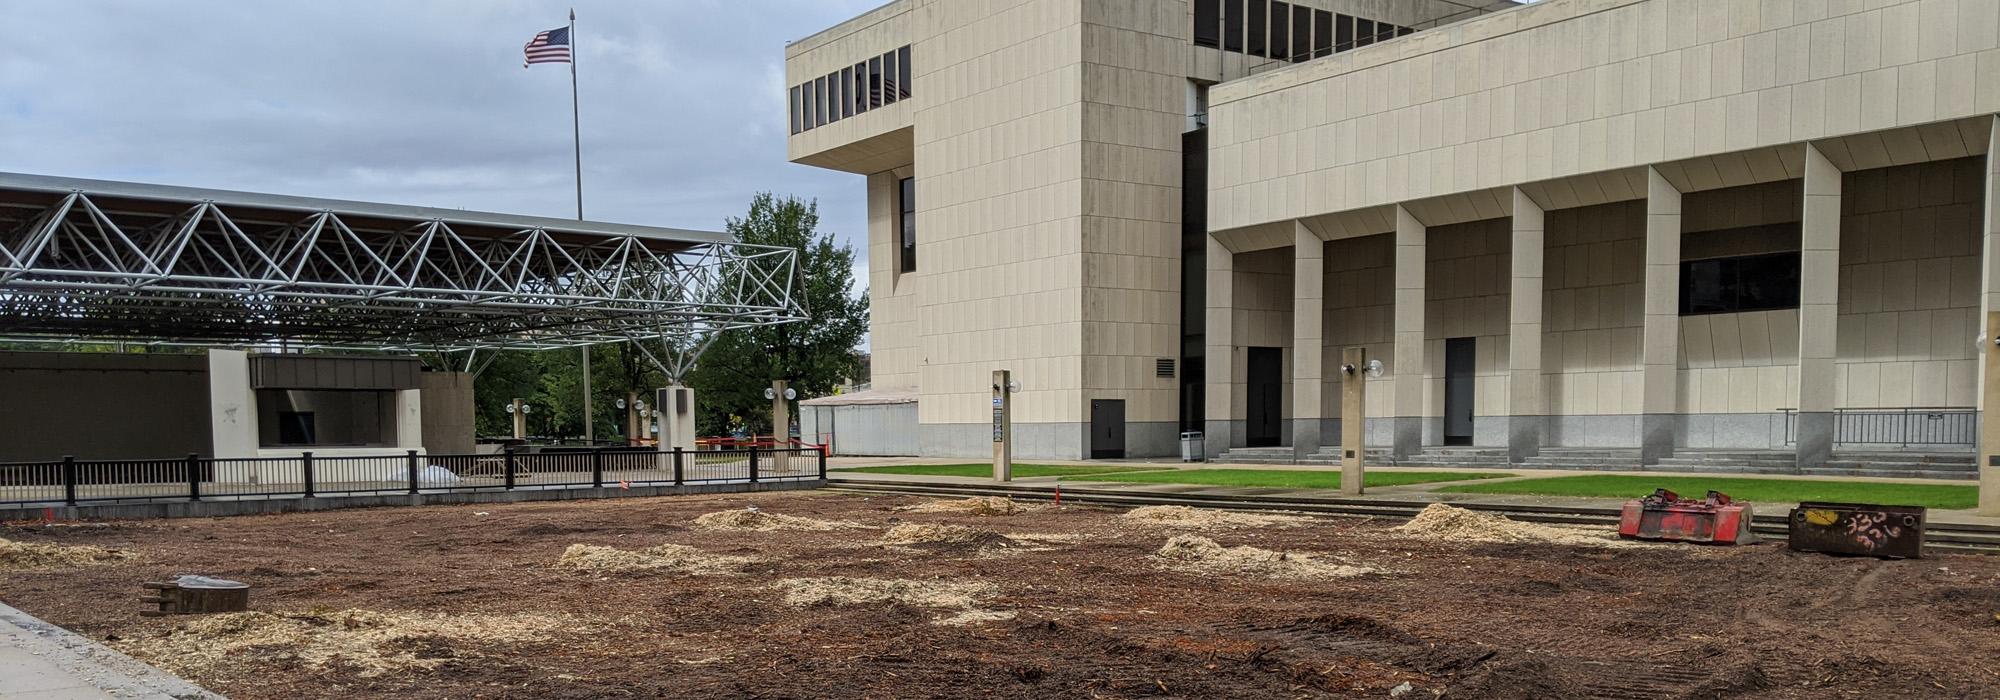 Original grove of trees at the Marcus Center cut down.